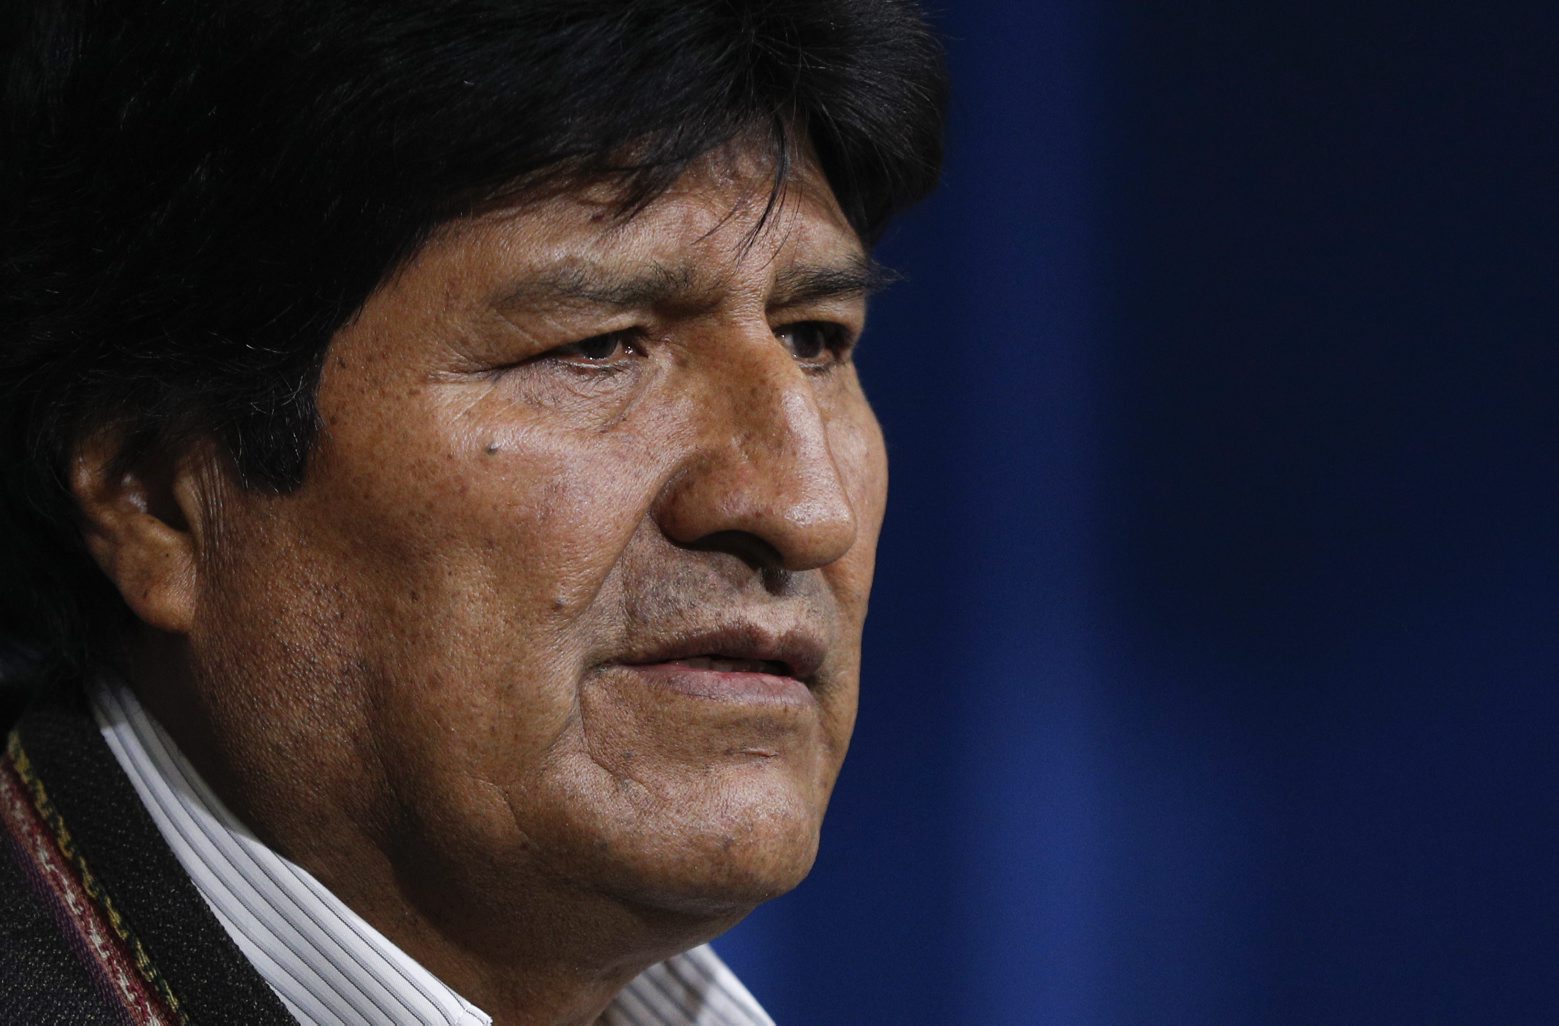 Bolivia's President Evo Morales looks on during a press conference in La Paz, Bolivia, Sunday, Nov. 10, 2019. Morales calls for new elections in Bolivia following the release of a preliminary report by the Organization of American States (OAS) that found irregularities in the October 20 vote. (AP Photo/Juan Karita)
Evo Morales Bolivia Elections